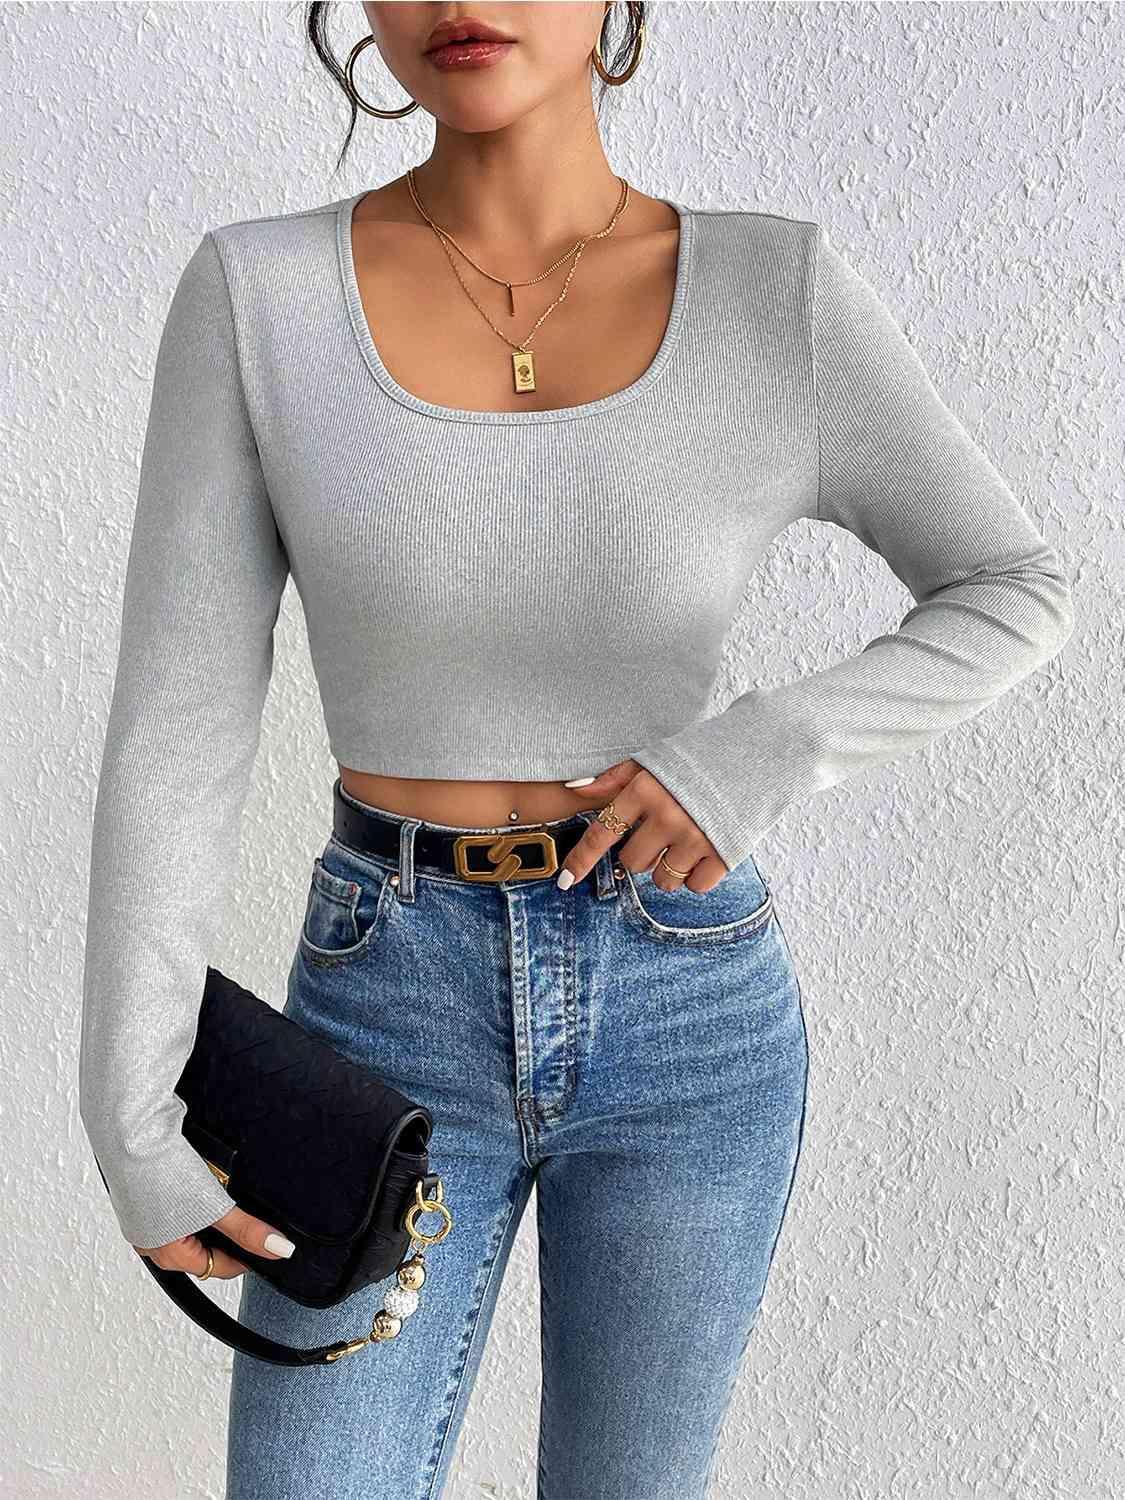 a woman wearing jeans and a crop top